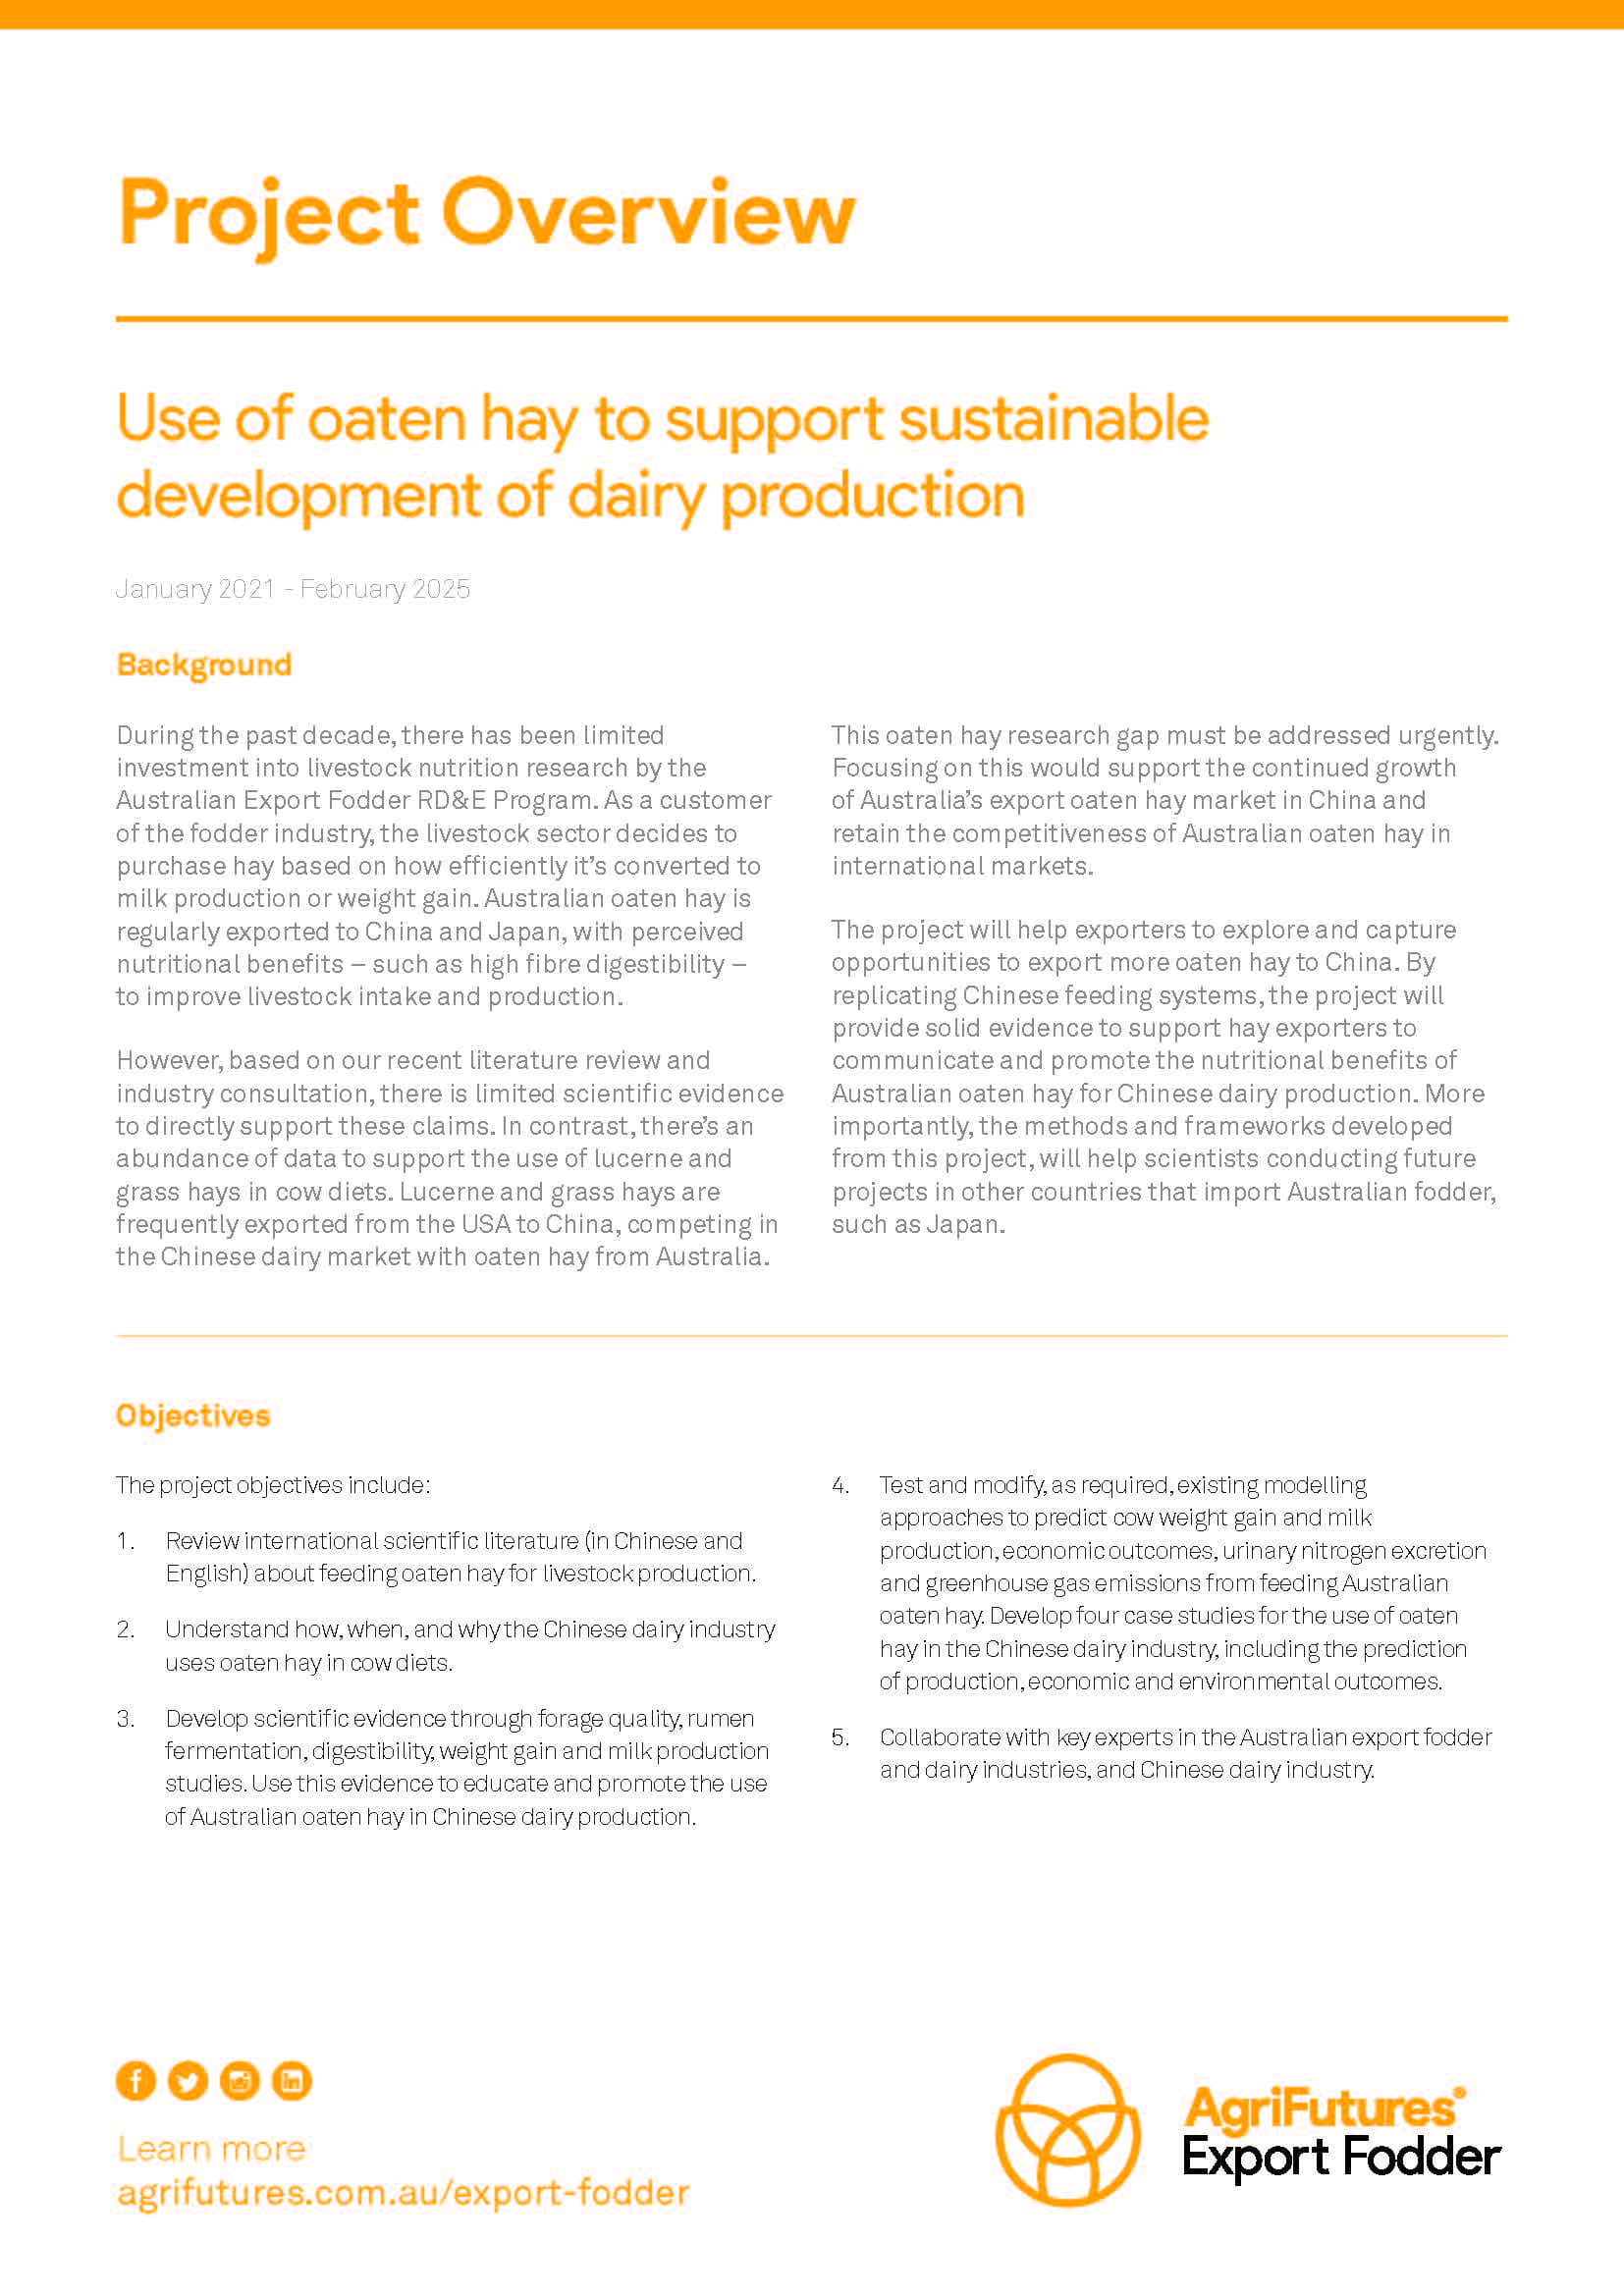 Project Overview: Use of oaten hay to support sustainable development of dairy production - image